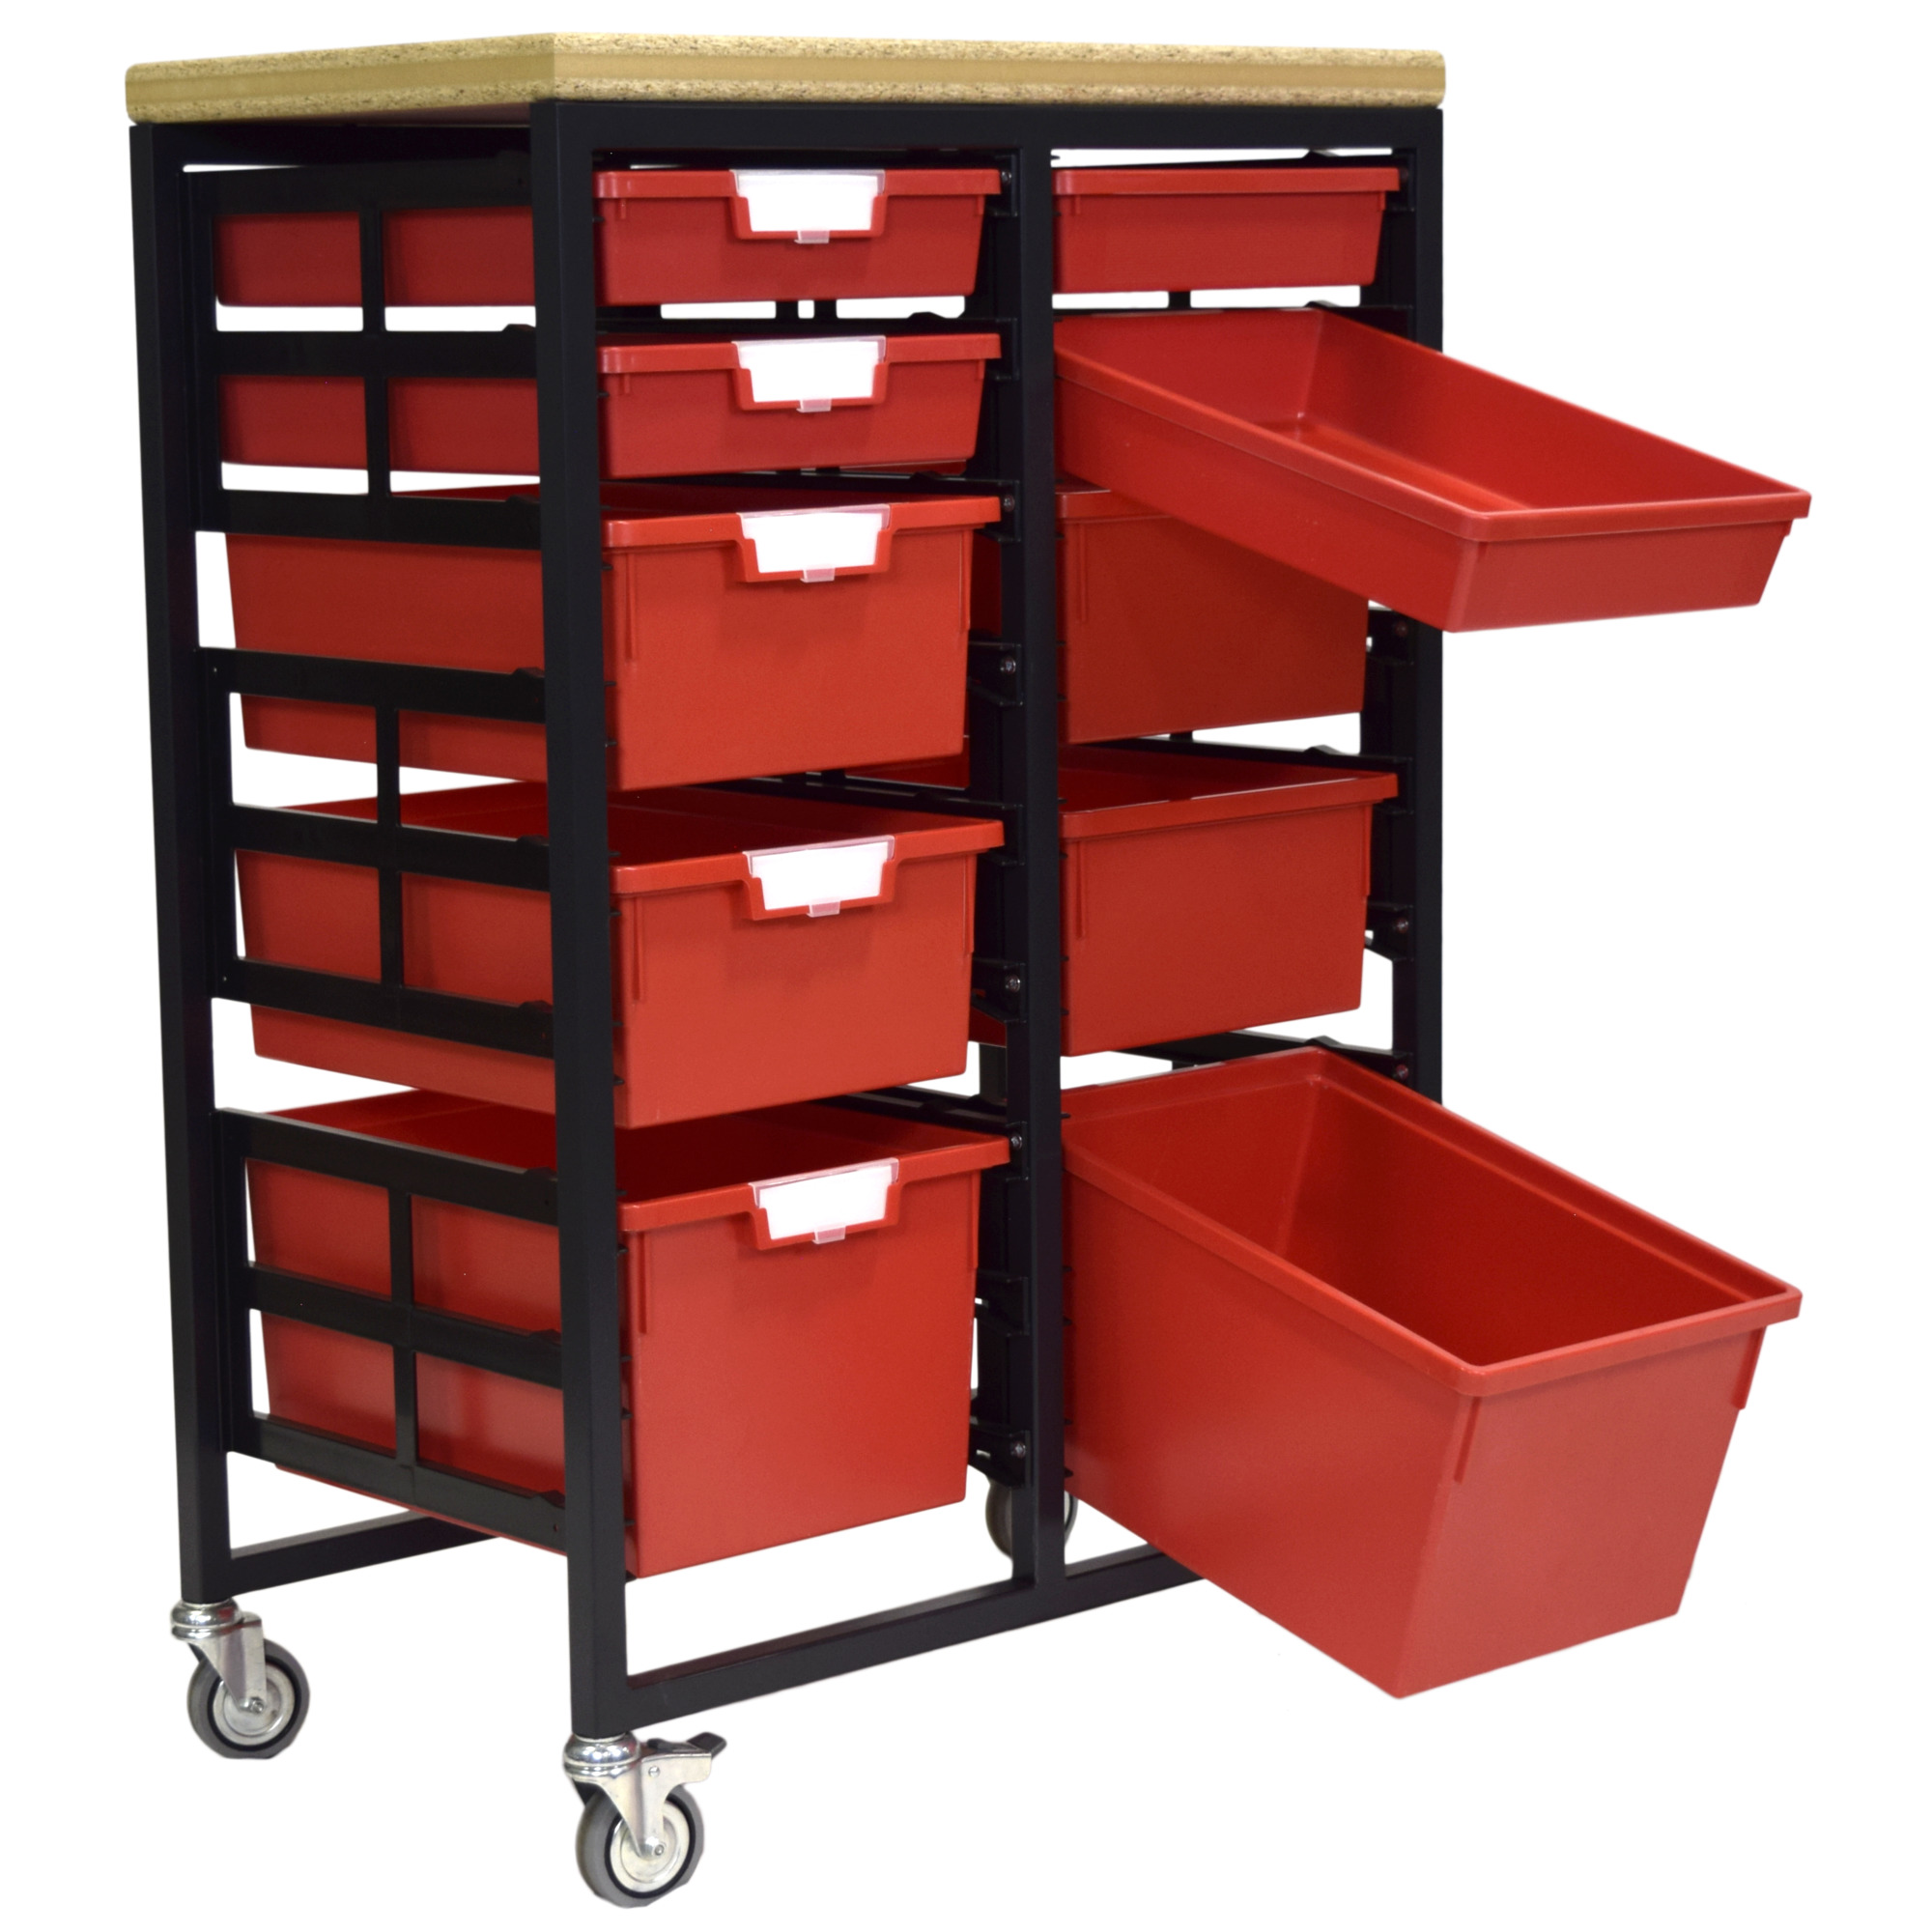 Certwood StorWerks, Mobile Work Station w/Wood Top -10 Trays-Red, Included (qty.) 10, Material Plastic, Height 12 in, Model CE2102DGGC-4S4D2TPR